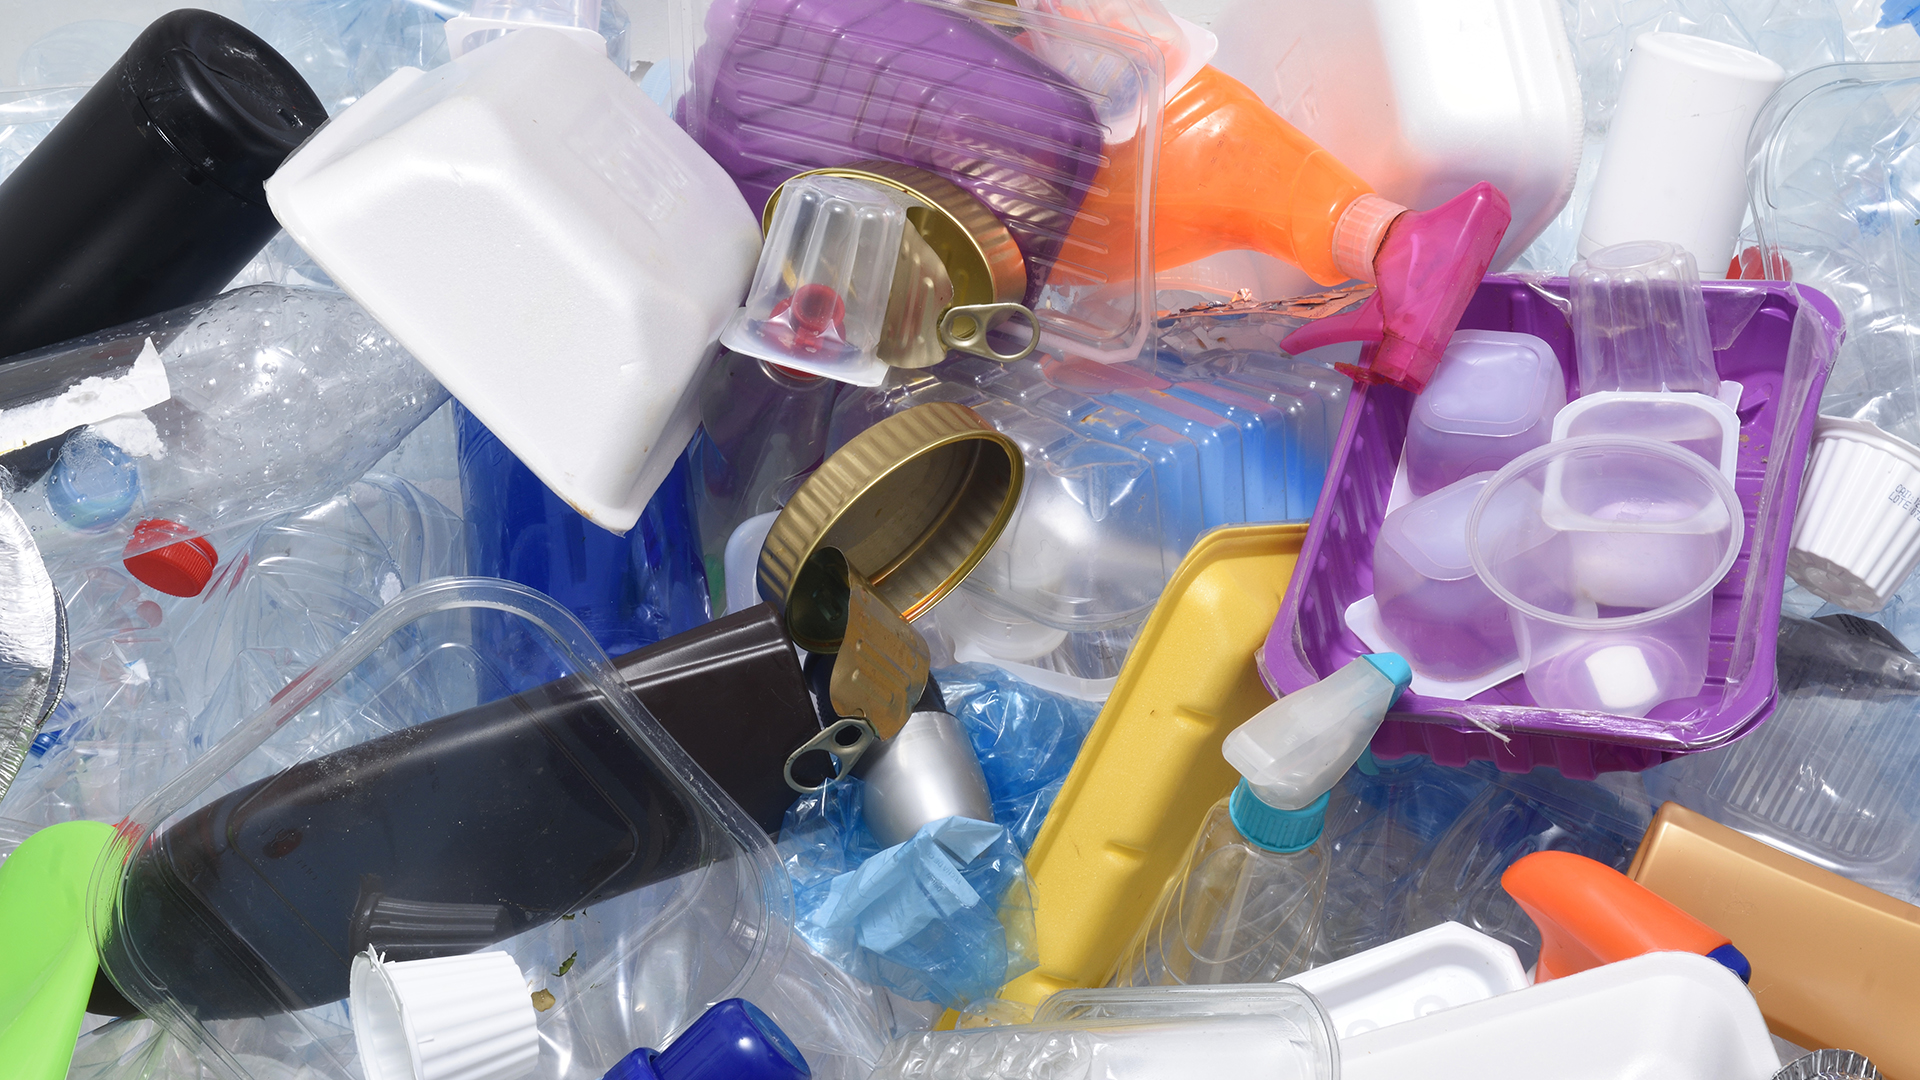 investigation-finds-troubling-level-of-chemicals-in-plastics